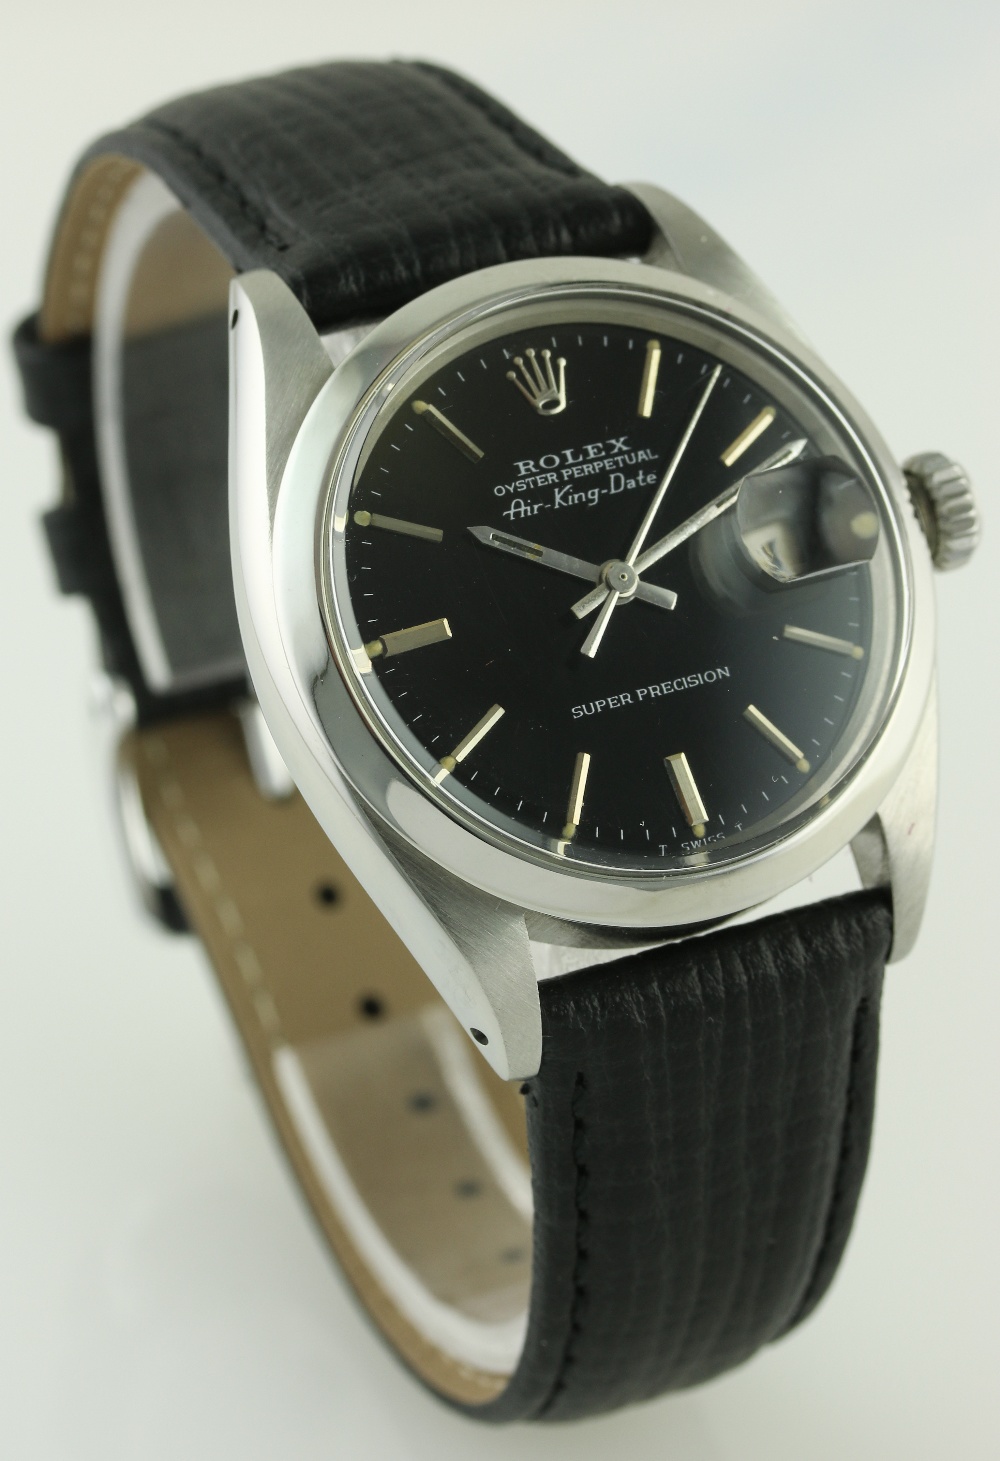 A GENTLEMAN'S STAINLESS STEEL ROLEX OYSTER PERPETUAL AIR KING DATE SUPER PRECISION WRIST WATCH CIRCA - Image 5 of 8